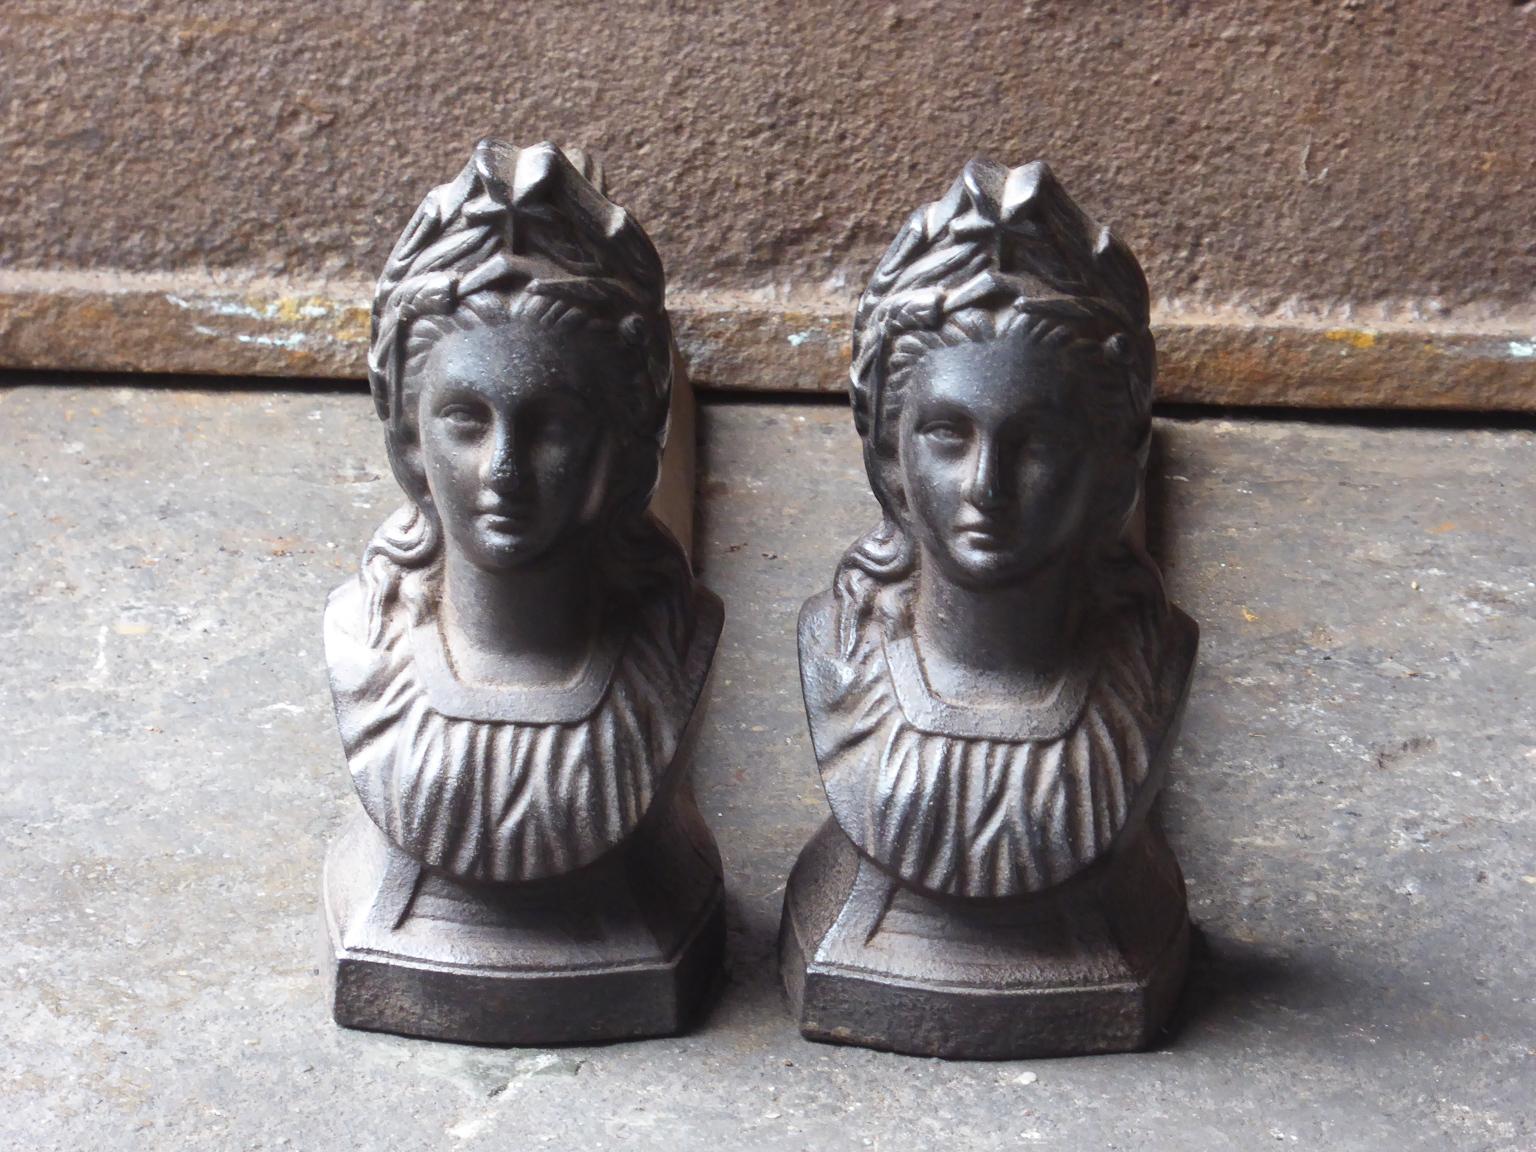 19th-20th century French Napoleon III andirons made of cast iron. Marianne is one of the most prominent symbols of the French Republic, and is officially used on most government documents. Her profile stands out on the official government logo of